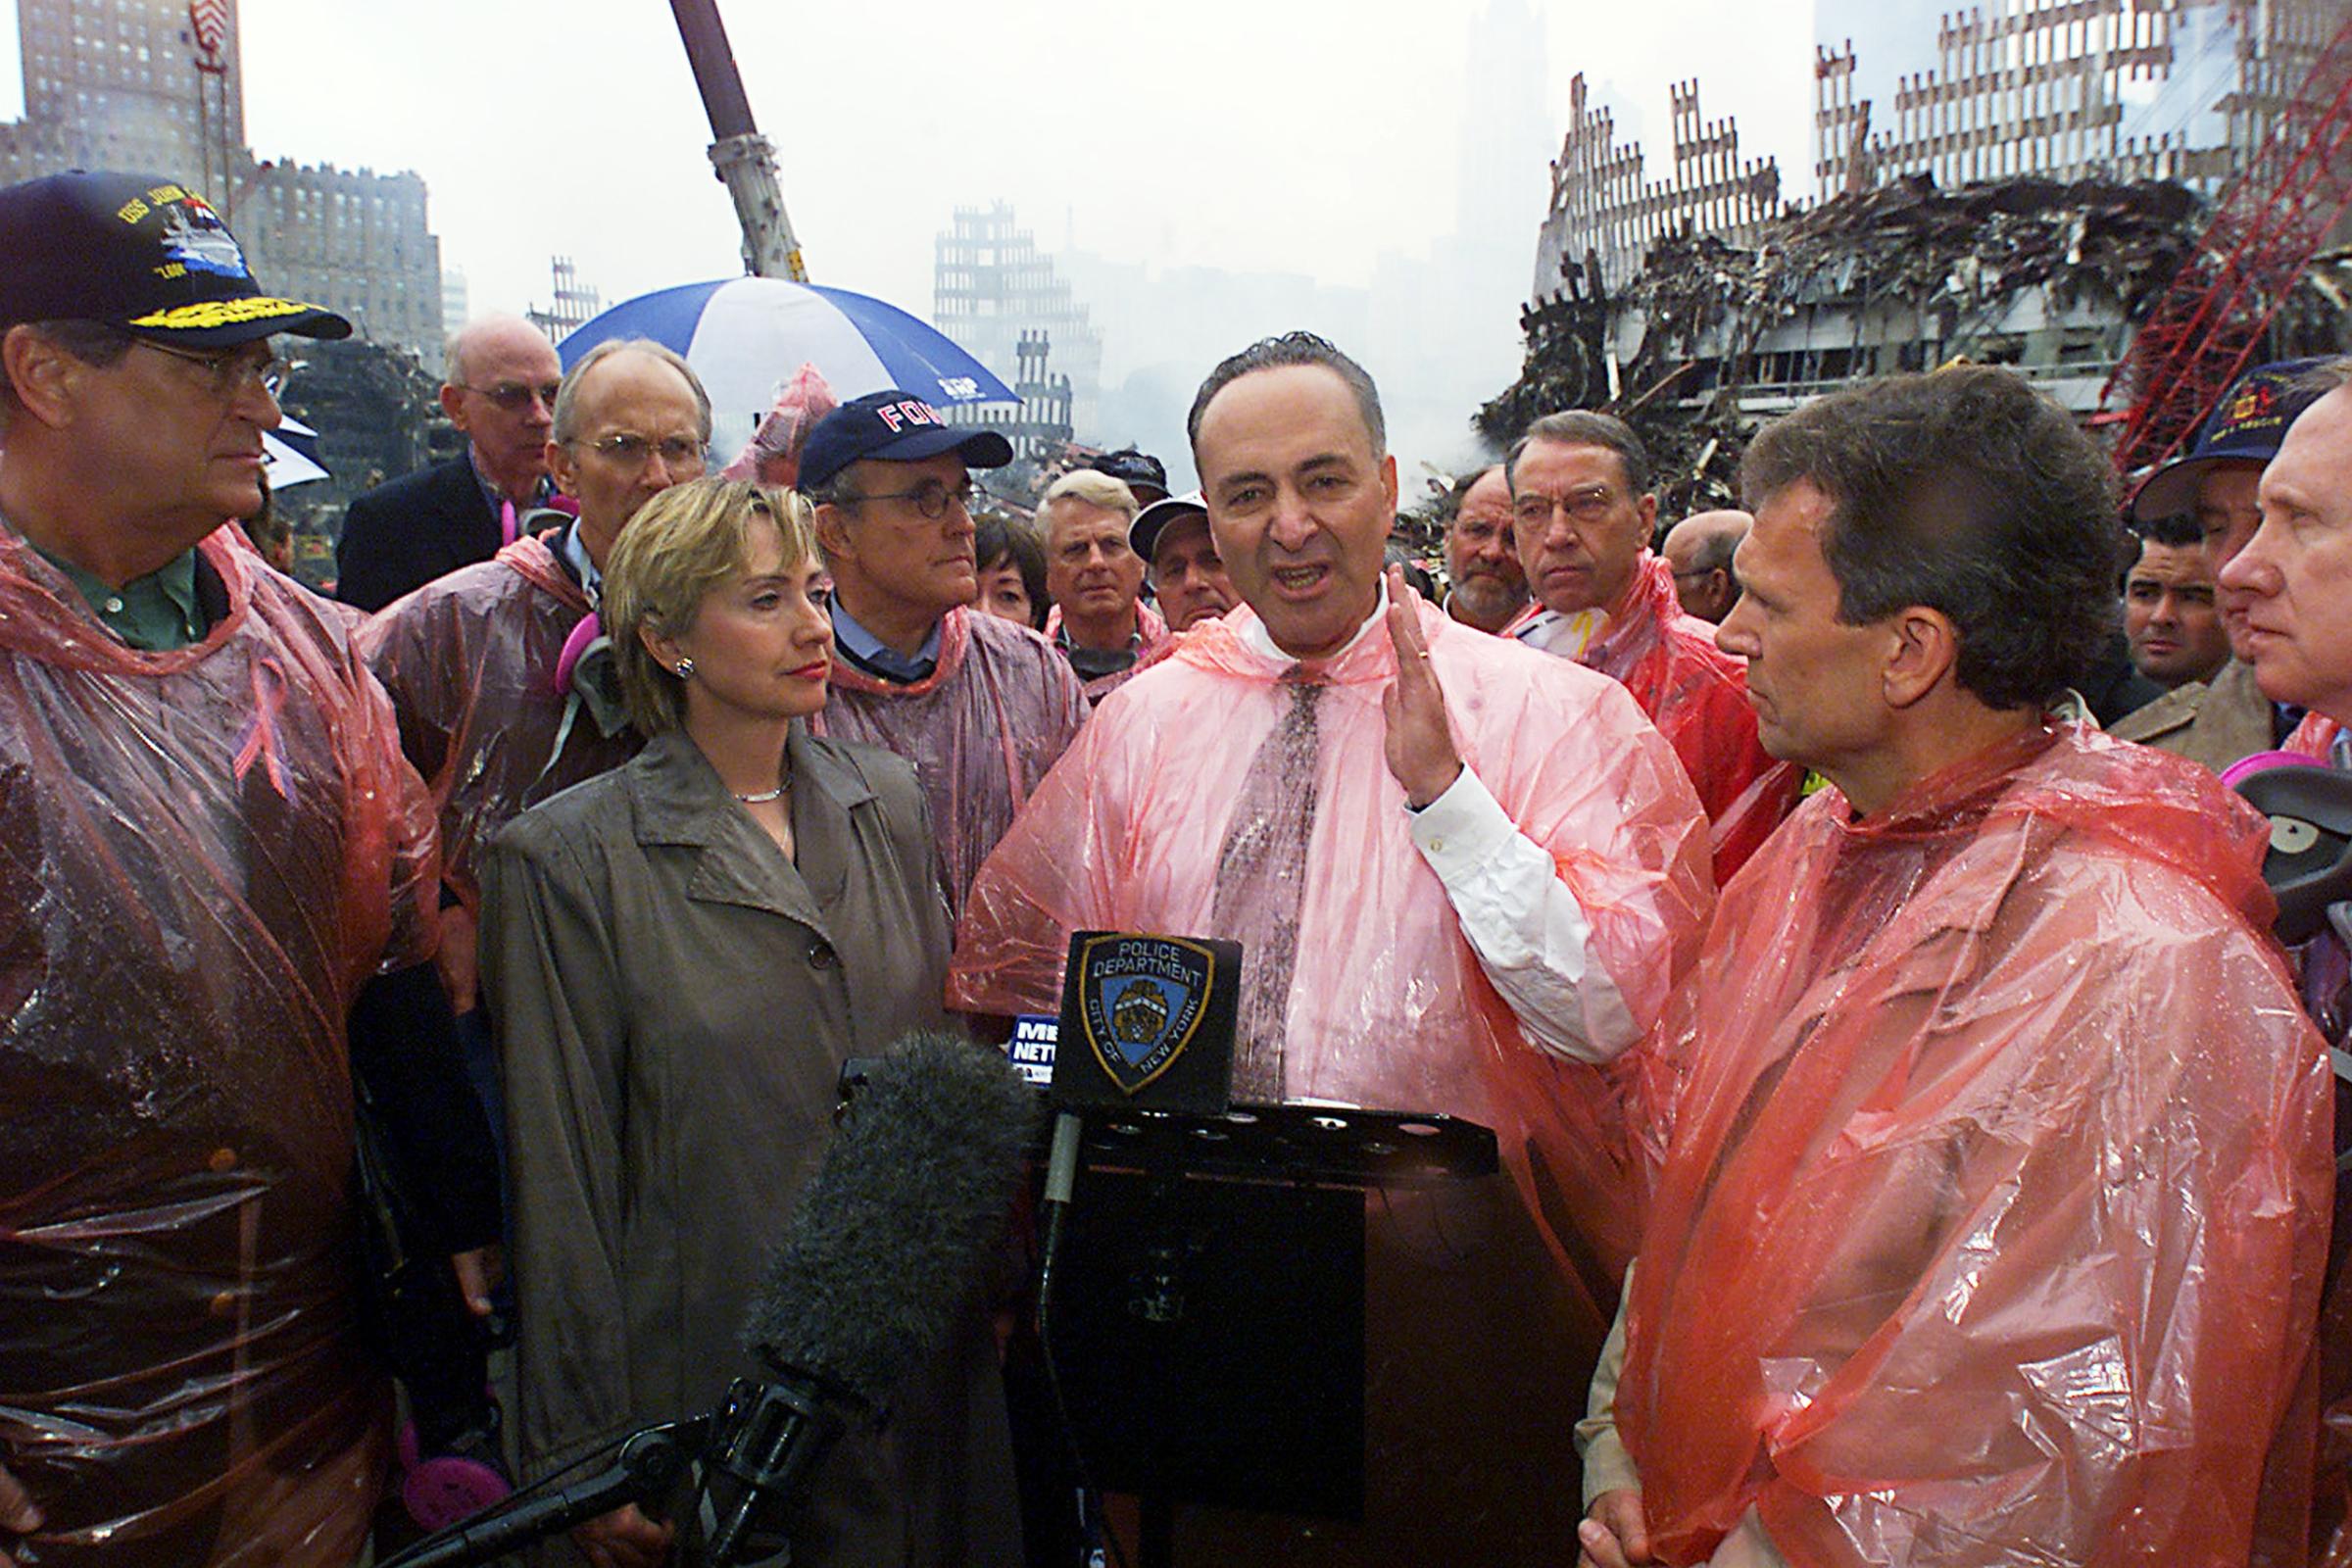 Sen. Schumer speaks as Sen. Hillary Rodham Clinton, Mayor Giuliani and members of a congressional delegation look on during a visit to the scene of devastation where the World Trade Center's twin towers stood, New York, Sept. 20, 2001.